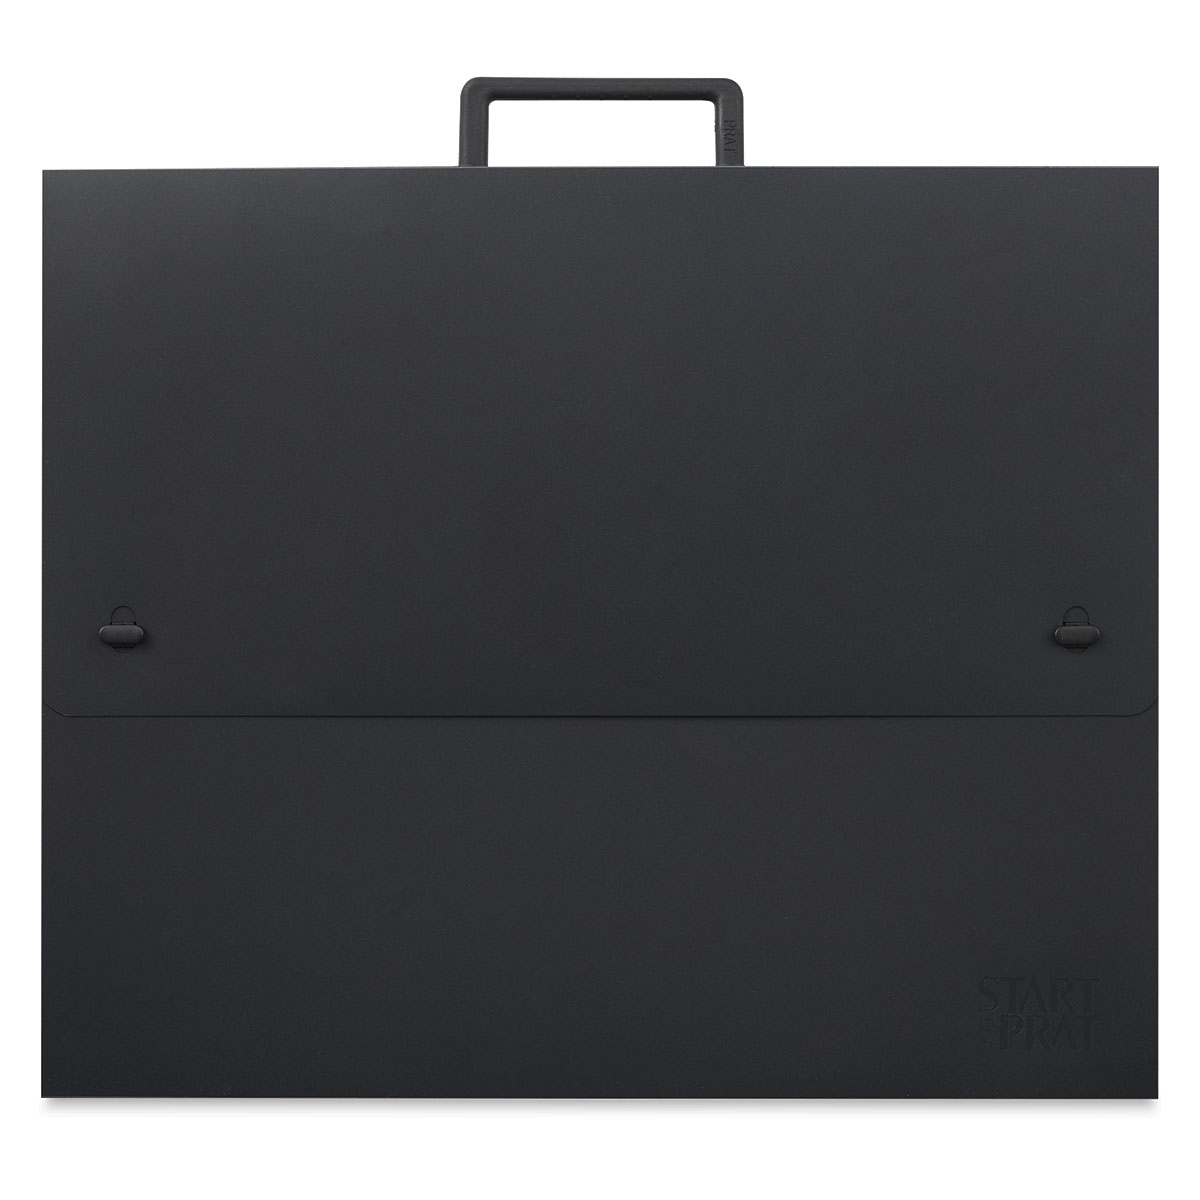 Weather-Resistant Cover with Handle Prat Start 0 Essential Portfolio Black 20 X 26 X 2.5 inches Double-Opening for Transport and Presentation S0-1261 